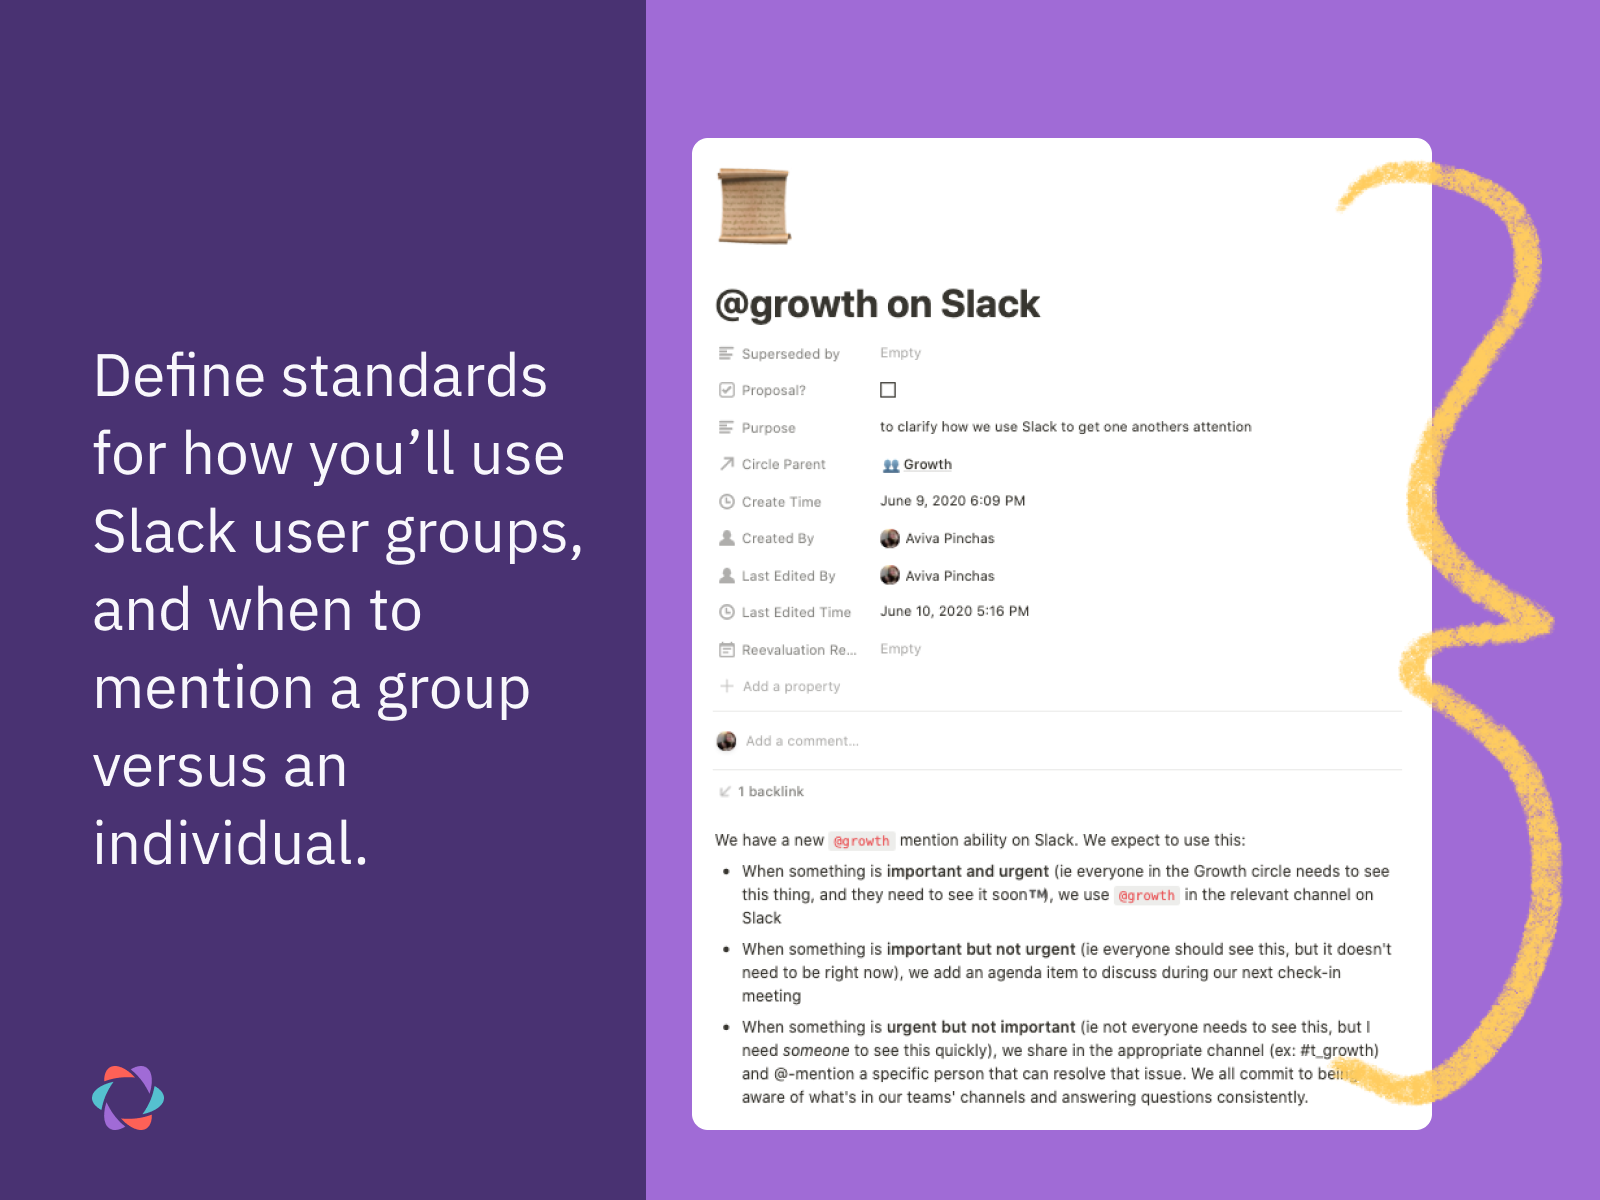 Parabol's policy on how to use Slack user group mentions